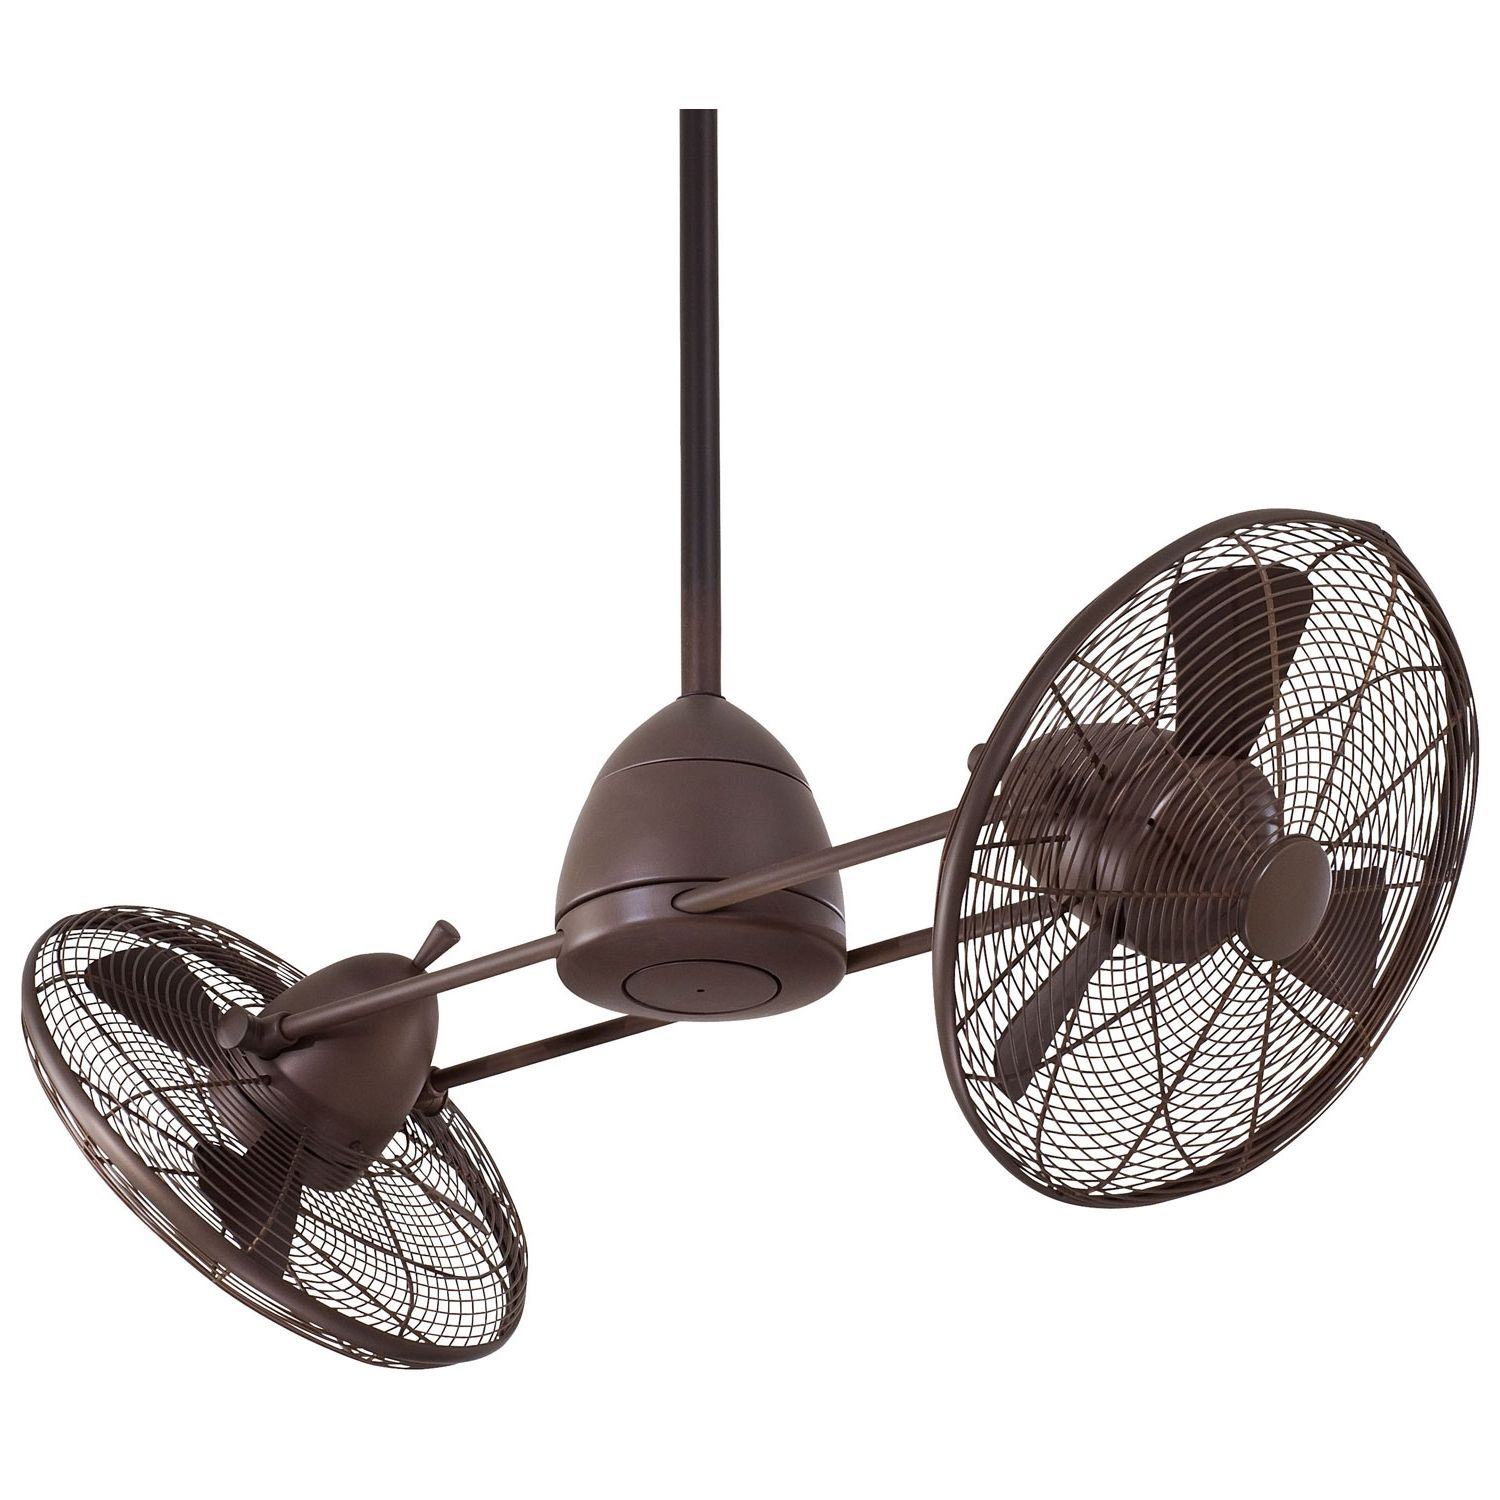 Vintage Look Outdoor Ceiling Fans In Well Known Minka Aire 42 Inch Gyro Wet Indoor/outdoor Oil Rubbed Bronze Ceiling (View 4 of 20)